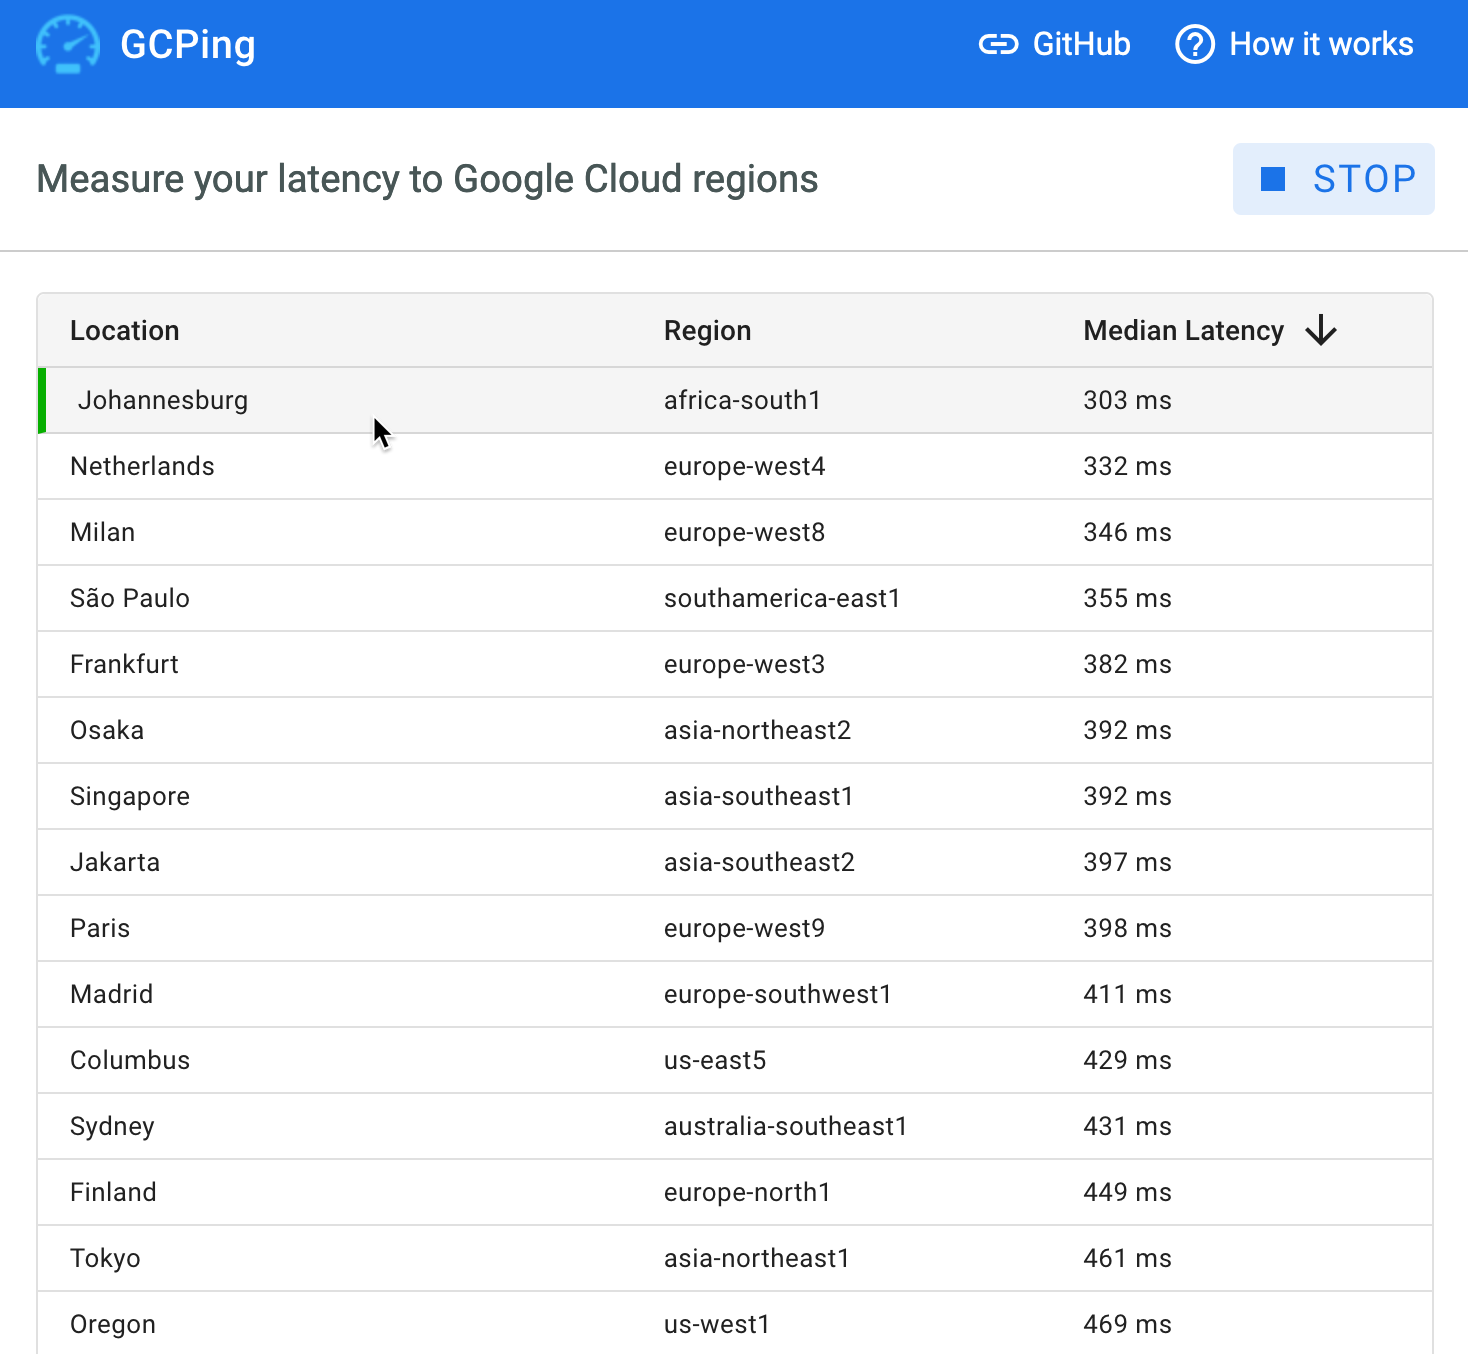 Screenshot of GCPing tool showing latency values for various data centers.